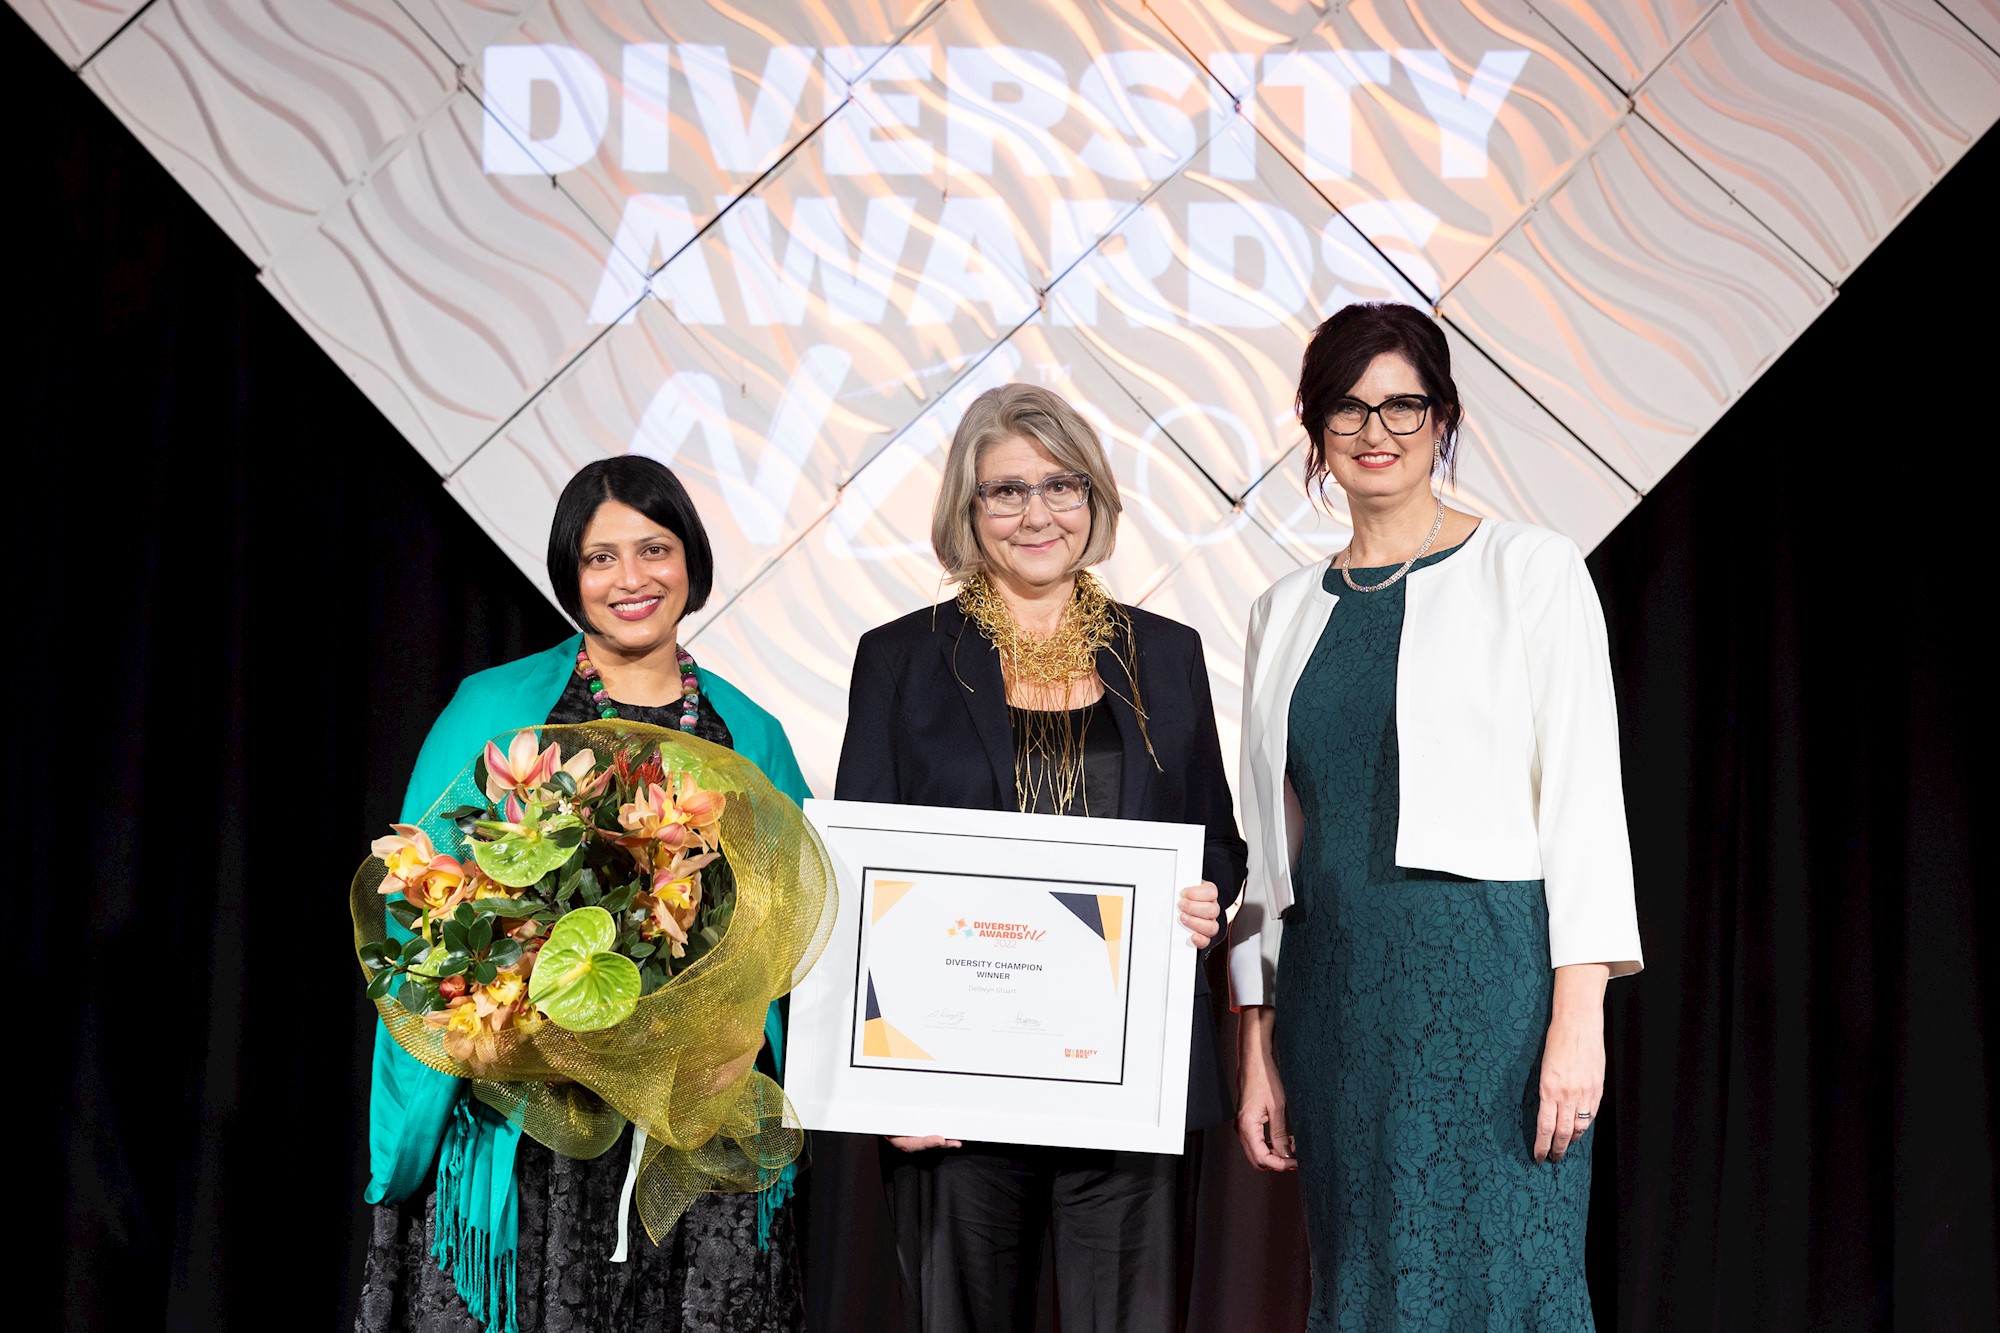 Dellwyn Stuart on stage with Diversity Champion certificate and flowers